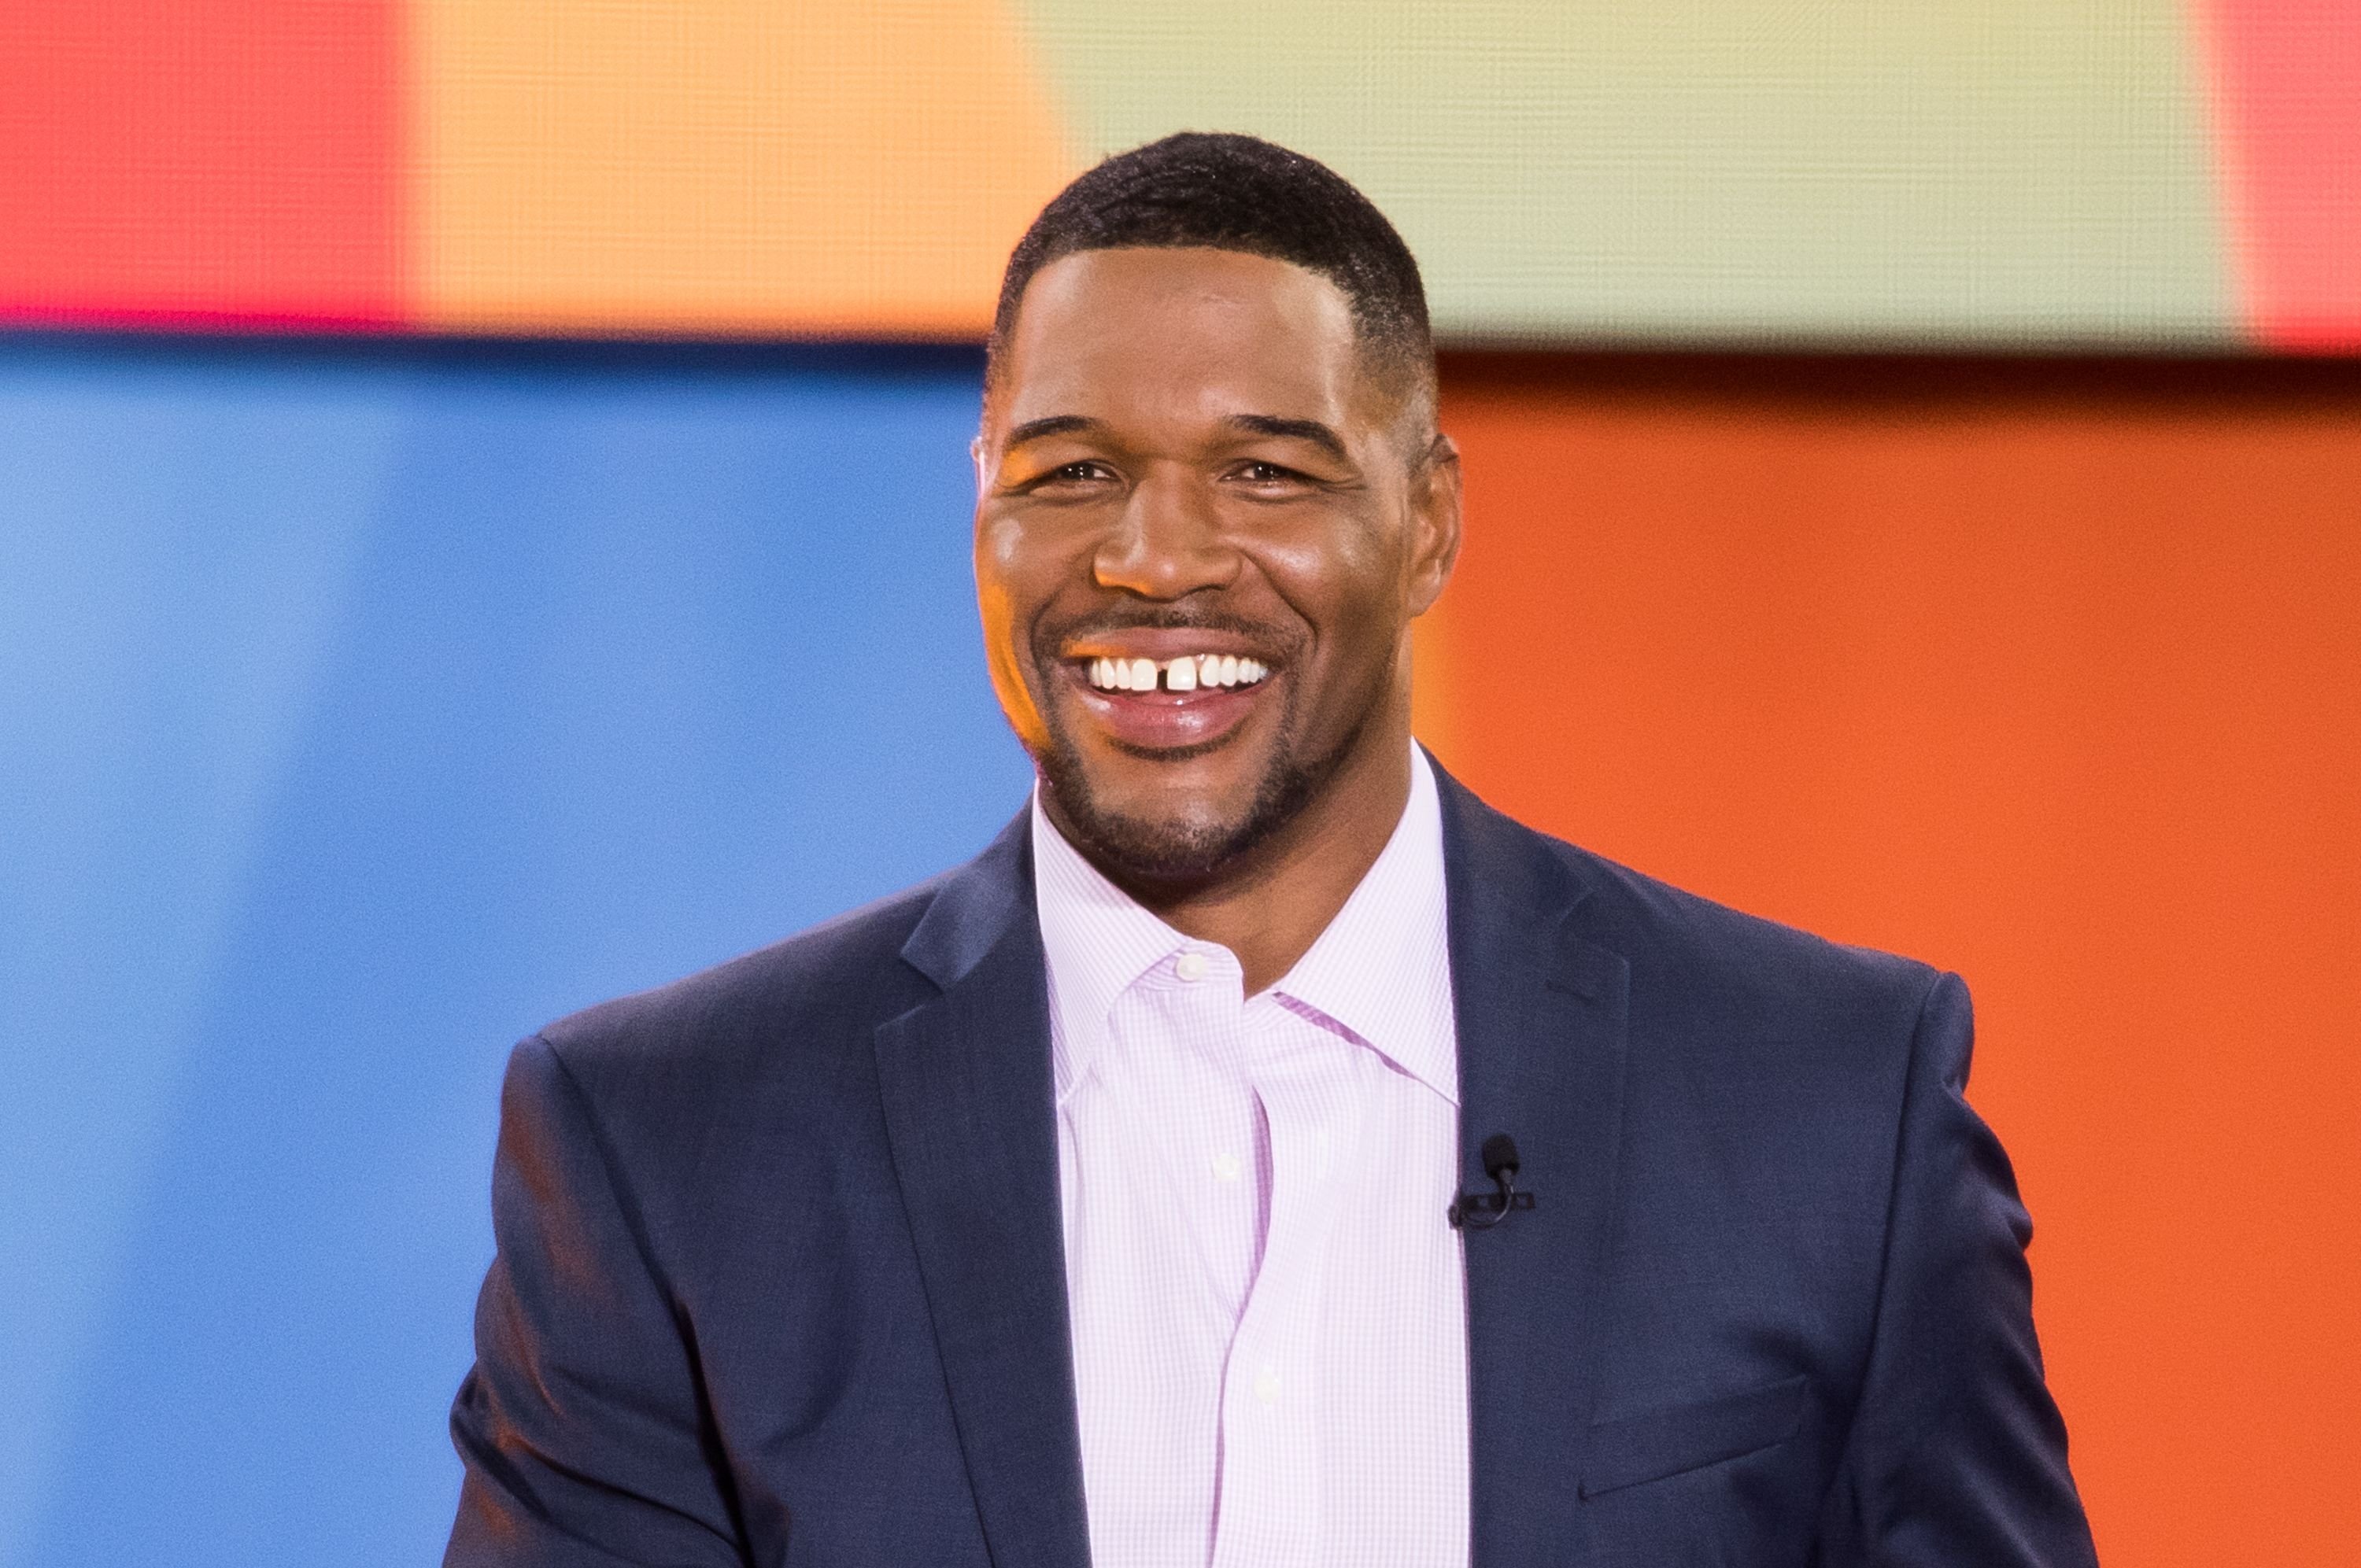 Michael Strahan at ABC's "Good Morning America" at Rumsey Playfield, Central Park on July 6, 2018 in New York City. | Source: Getty Images